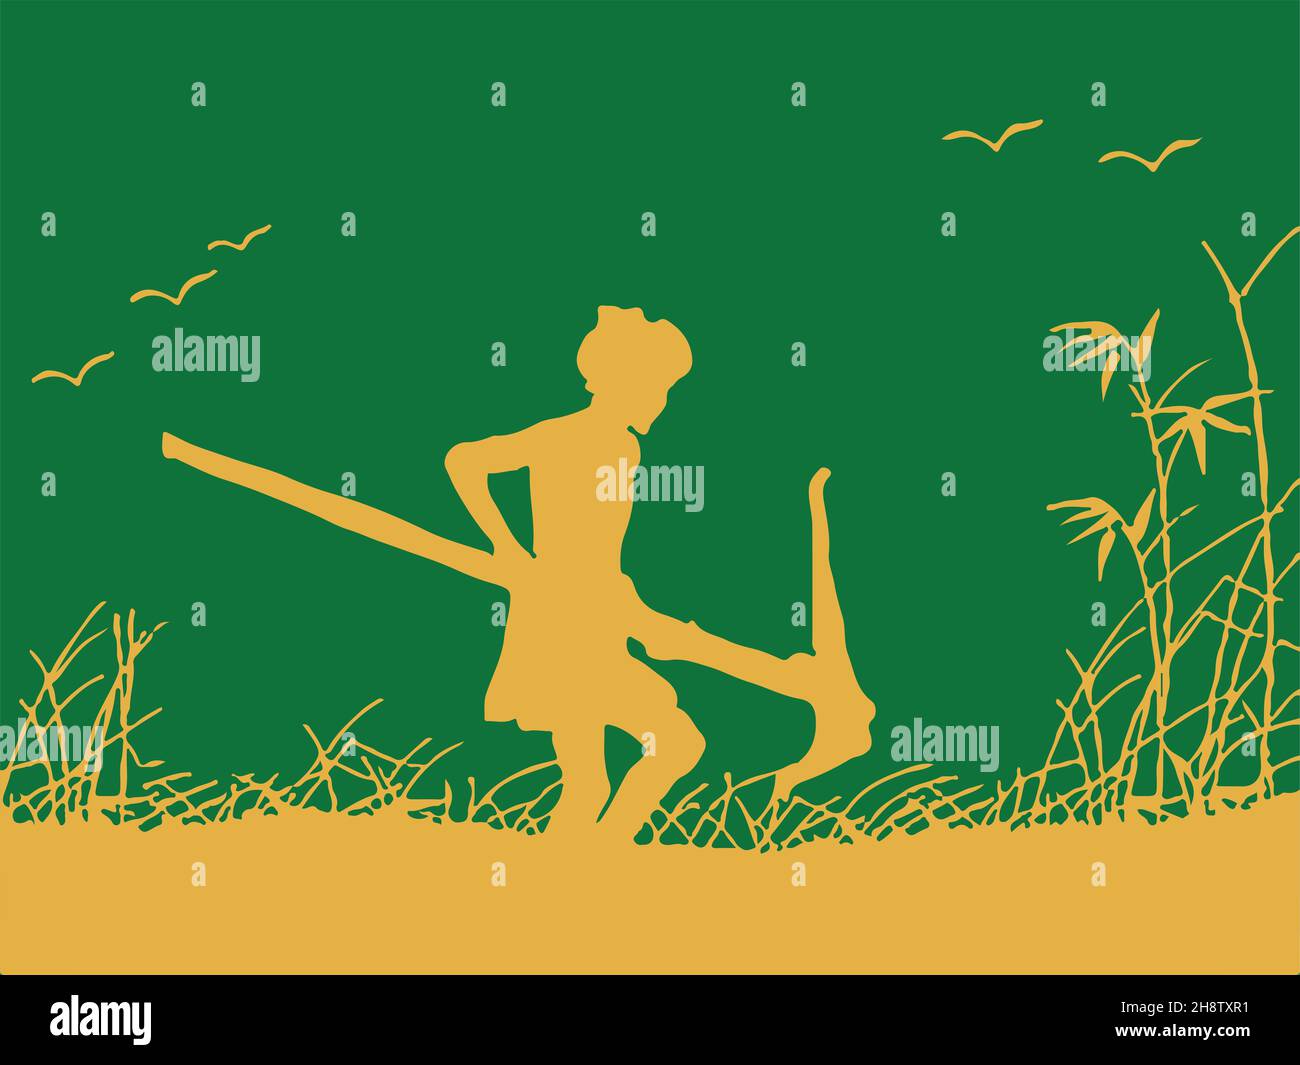 Silhouette drawing or sketch an agriculture farmer in a farmland Stock Photo